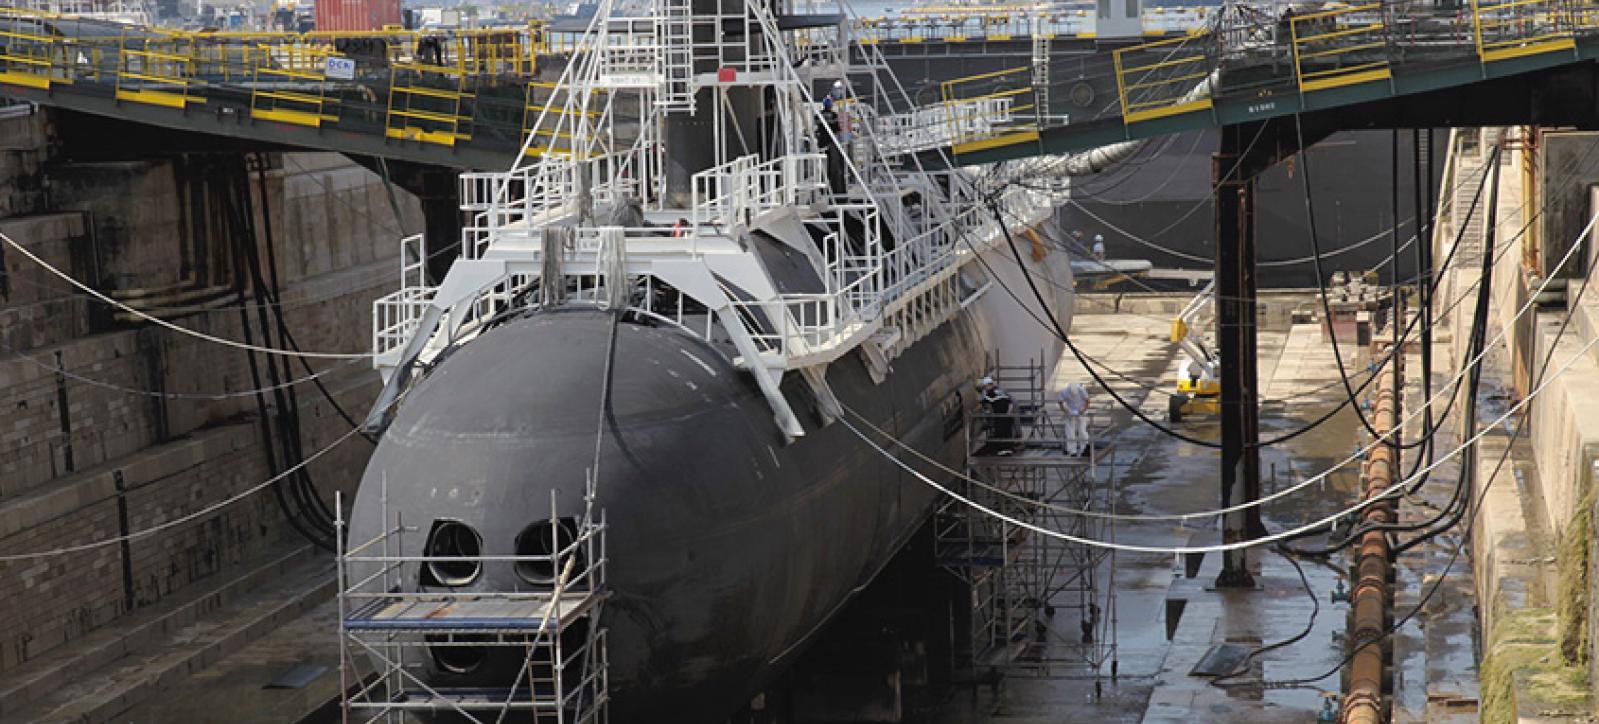 Naval Group Signs Contract to Maintain French Navyâ€™s Nuclear Submarine Fleet